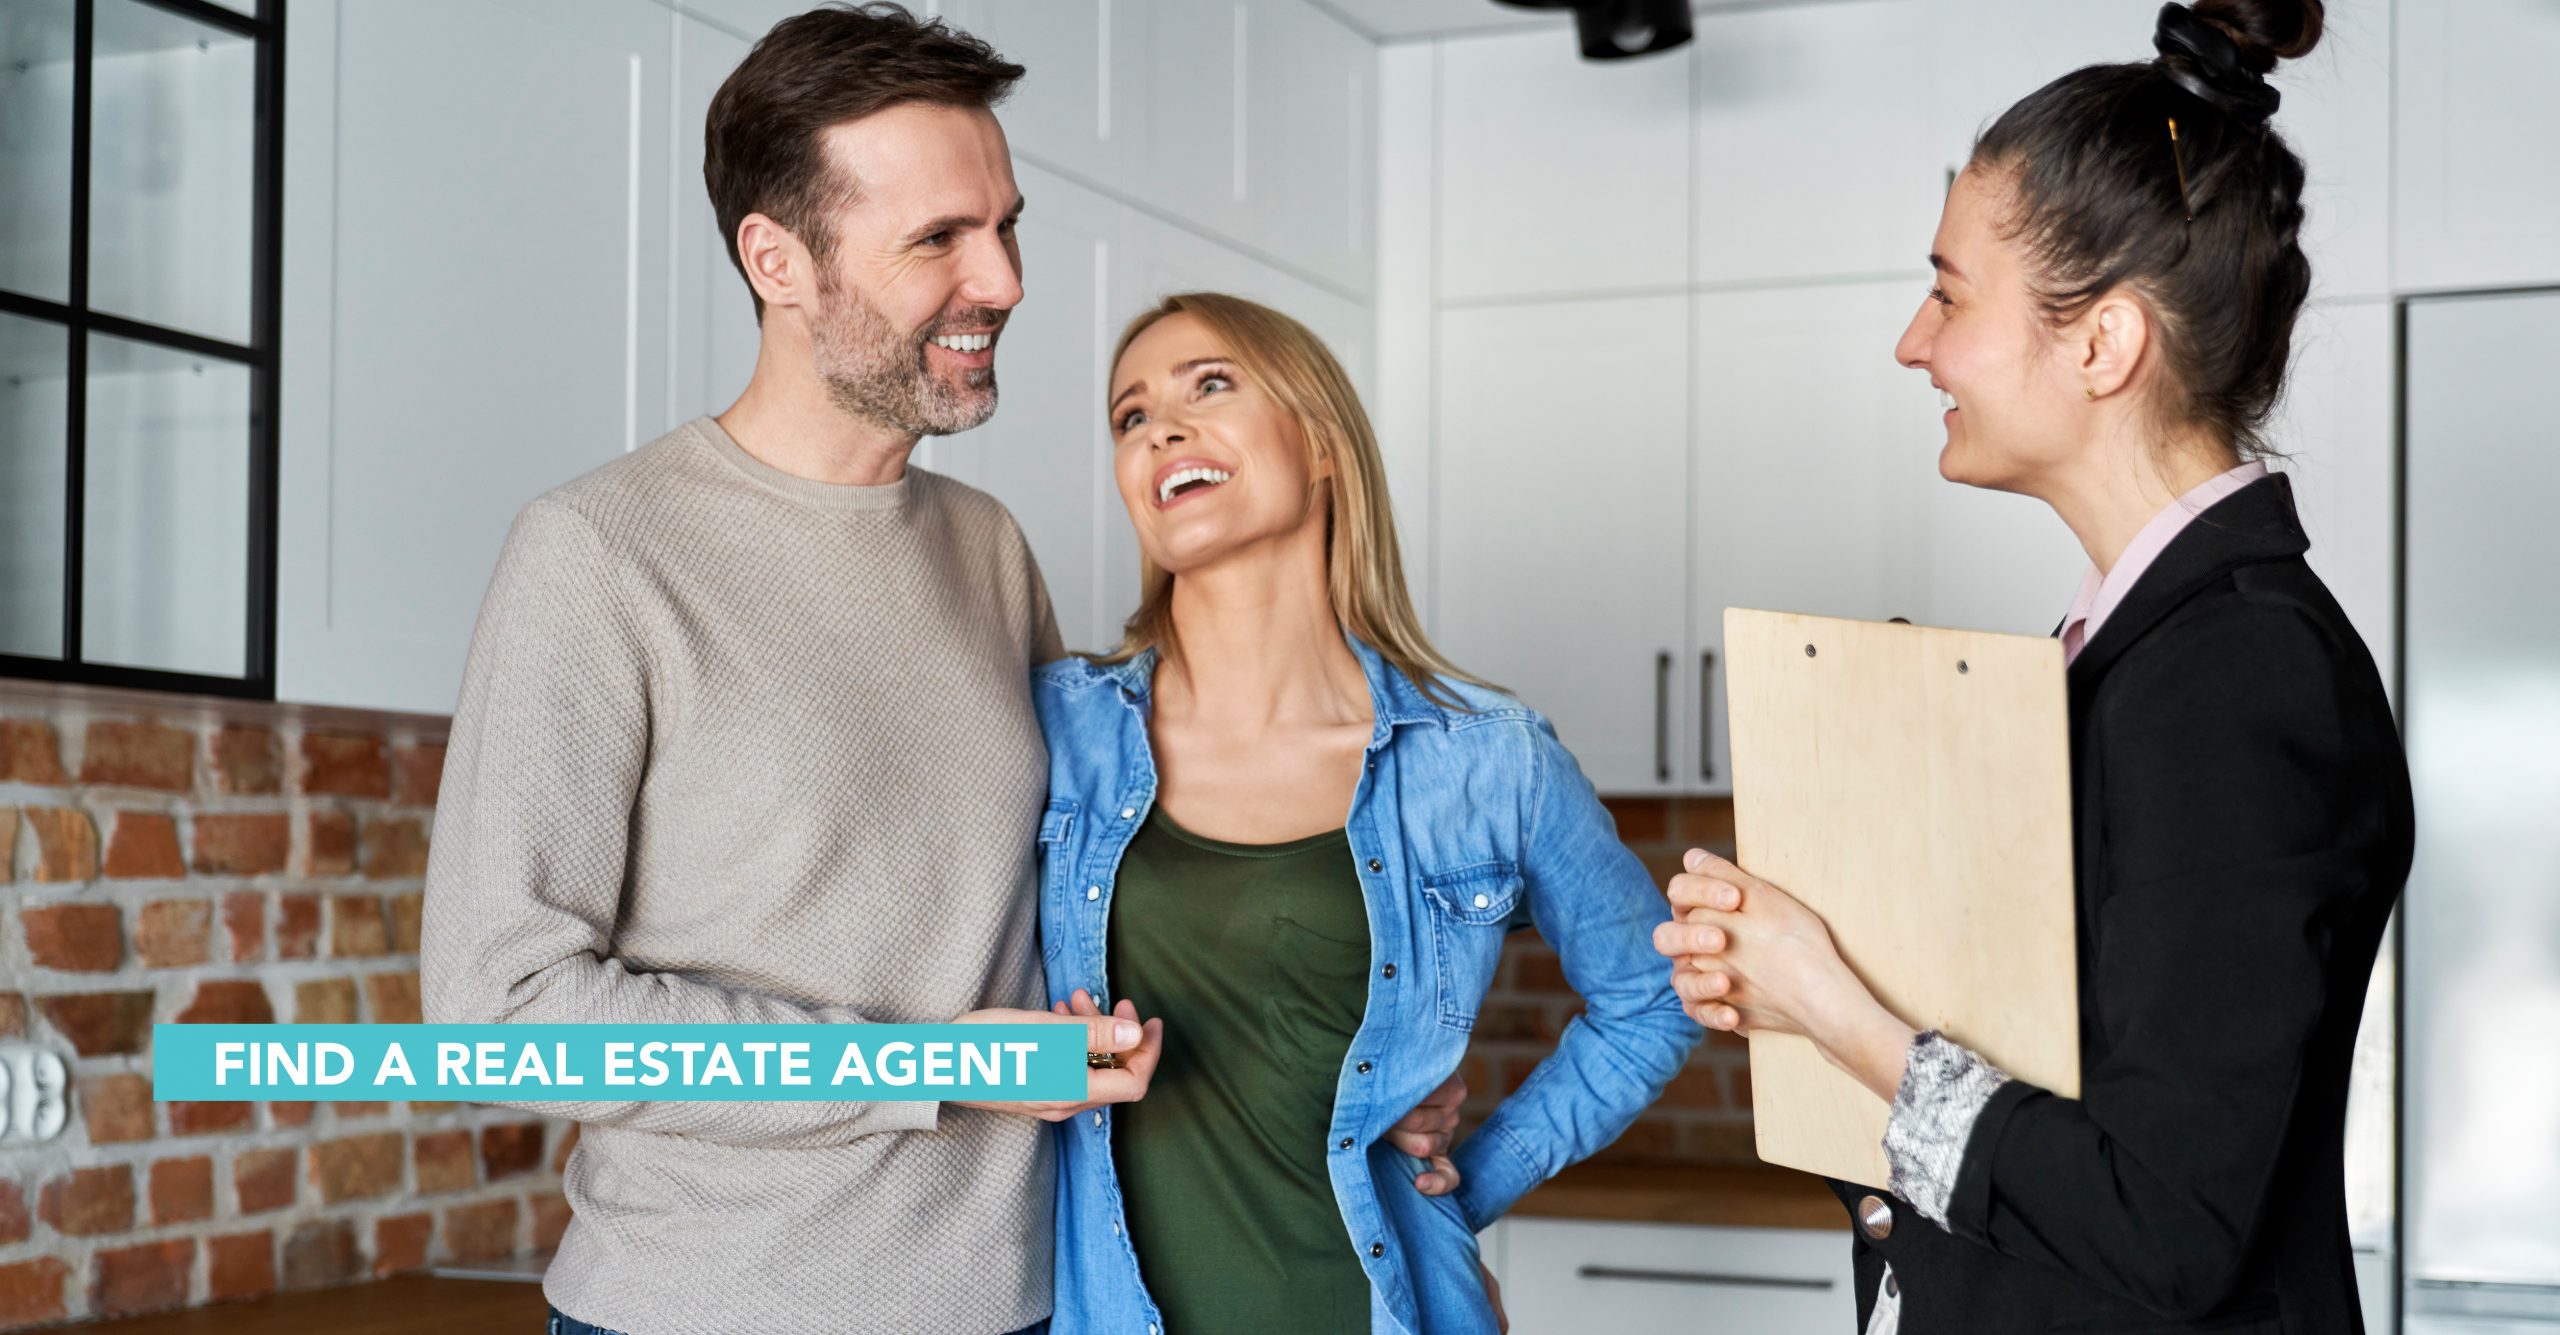 Find a real estate agent